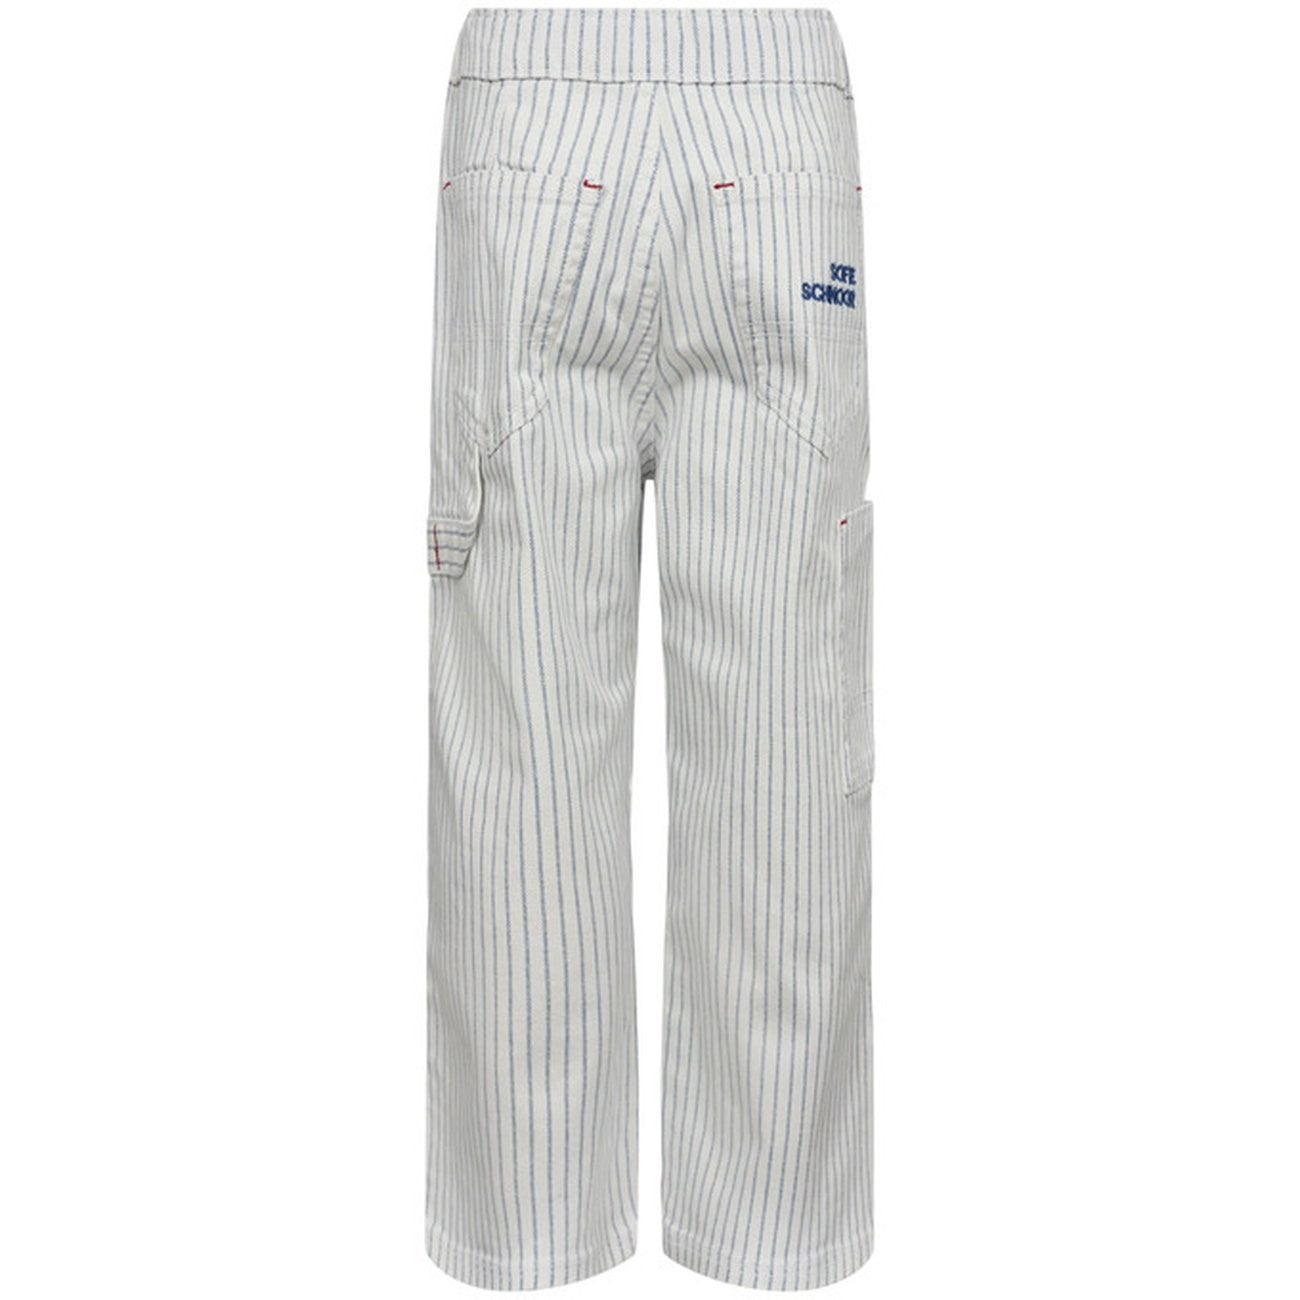 Sofie Schnoor Blue Striped Trousers 8